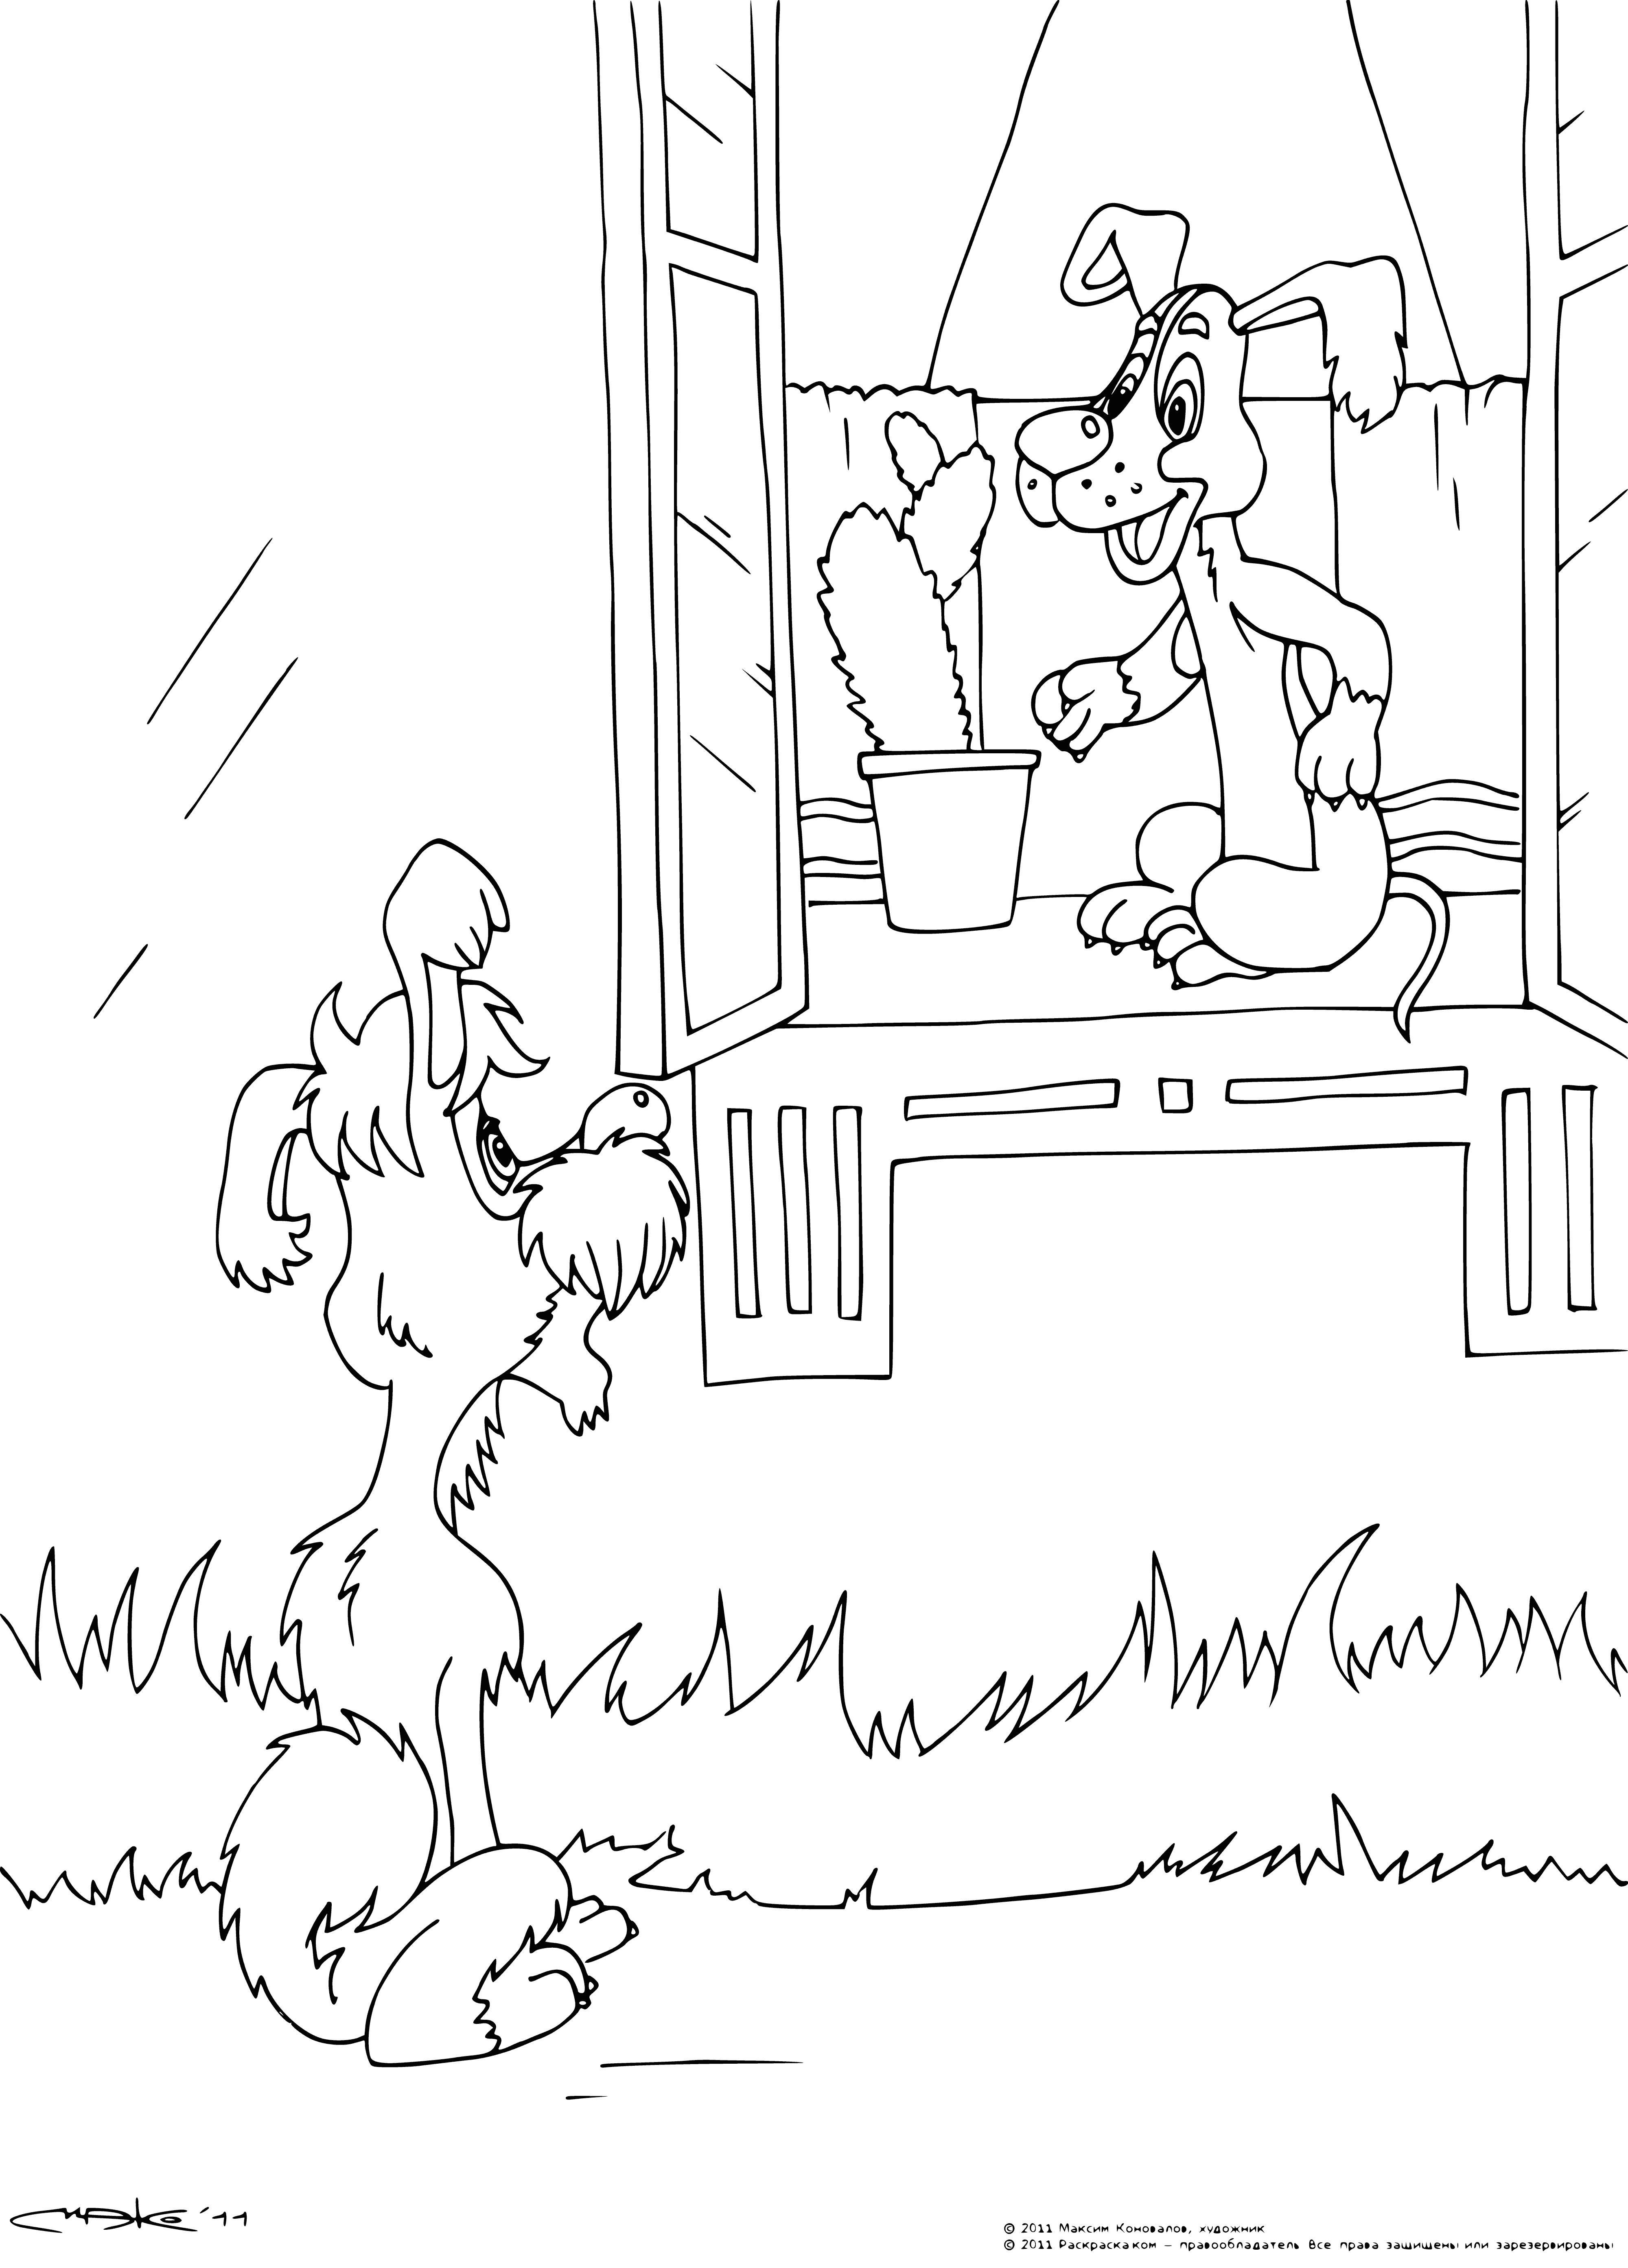 coloring page: Dog sadly begs to be let in outside large door, paw outstretched.